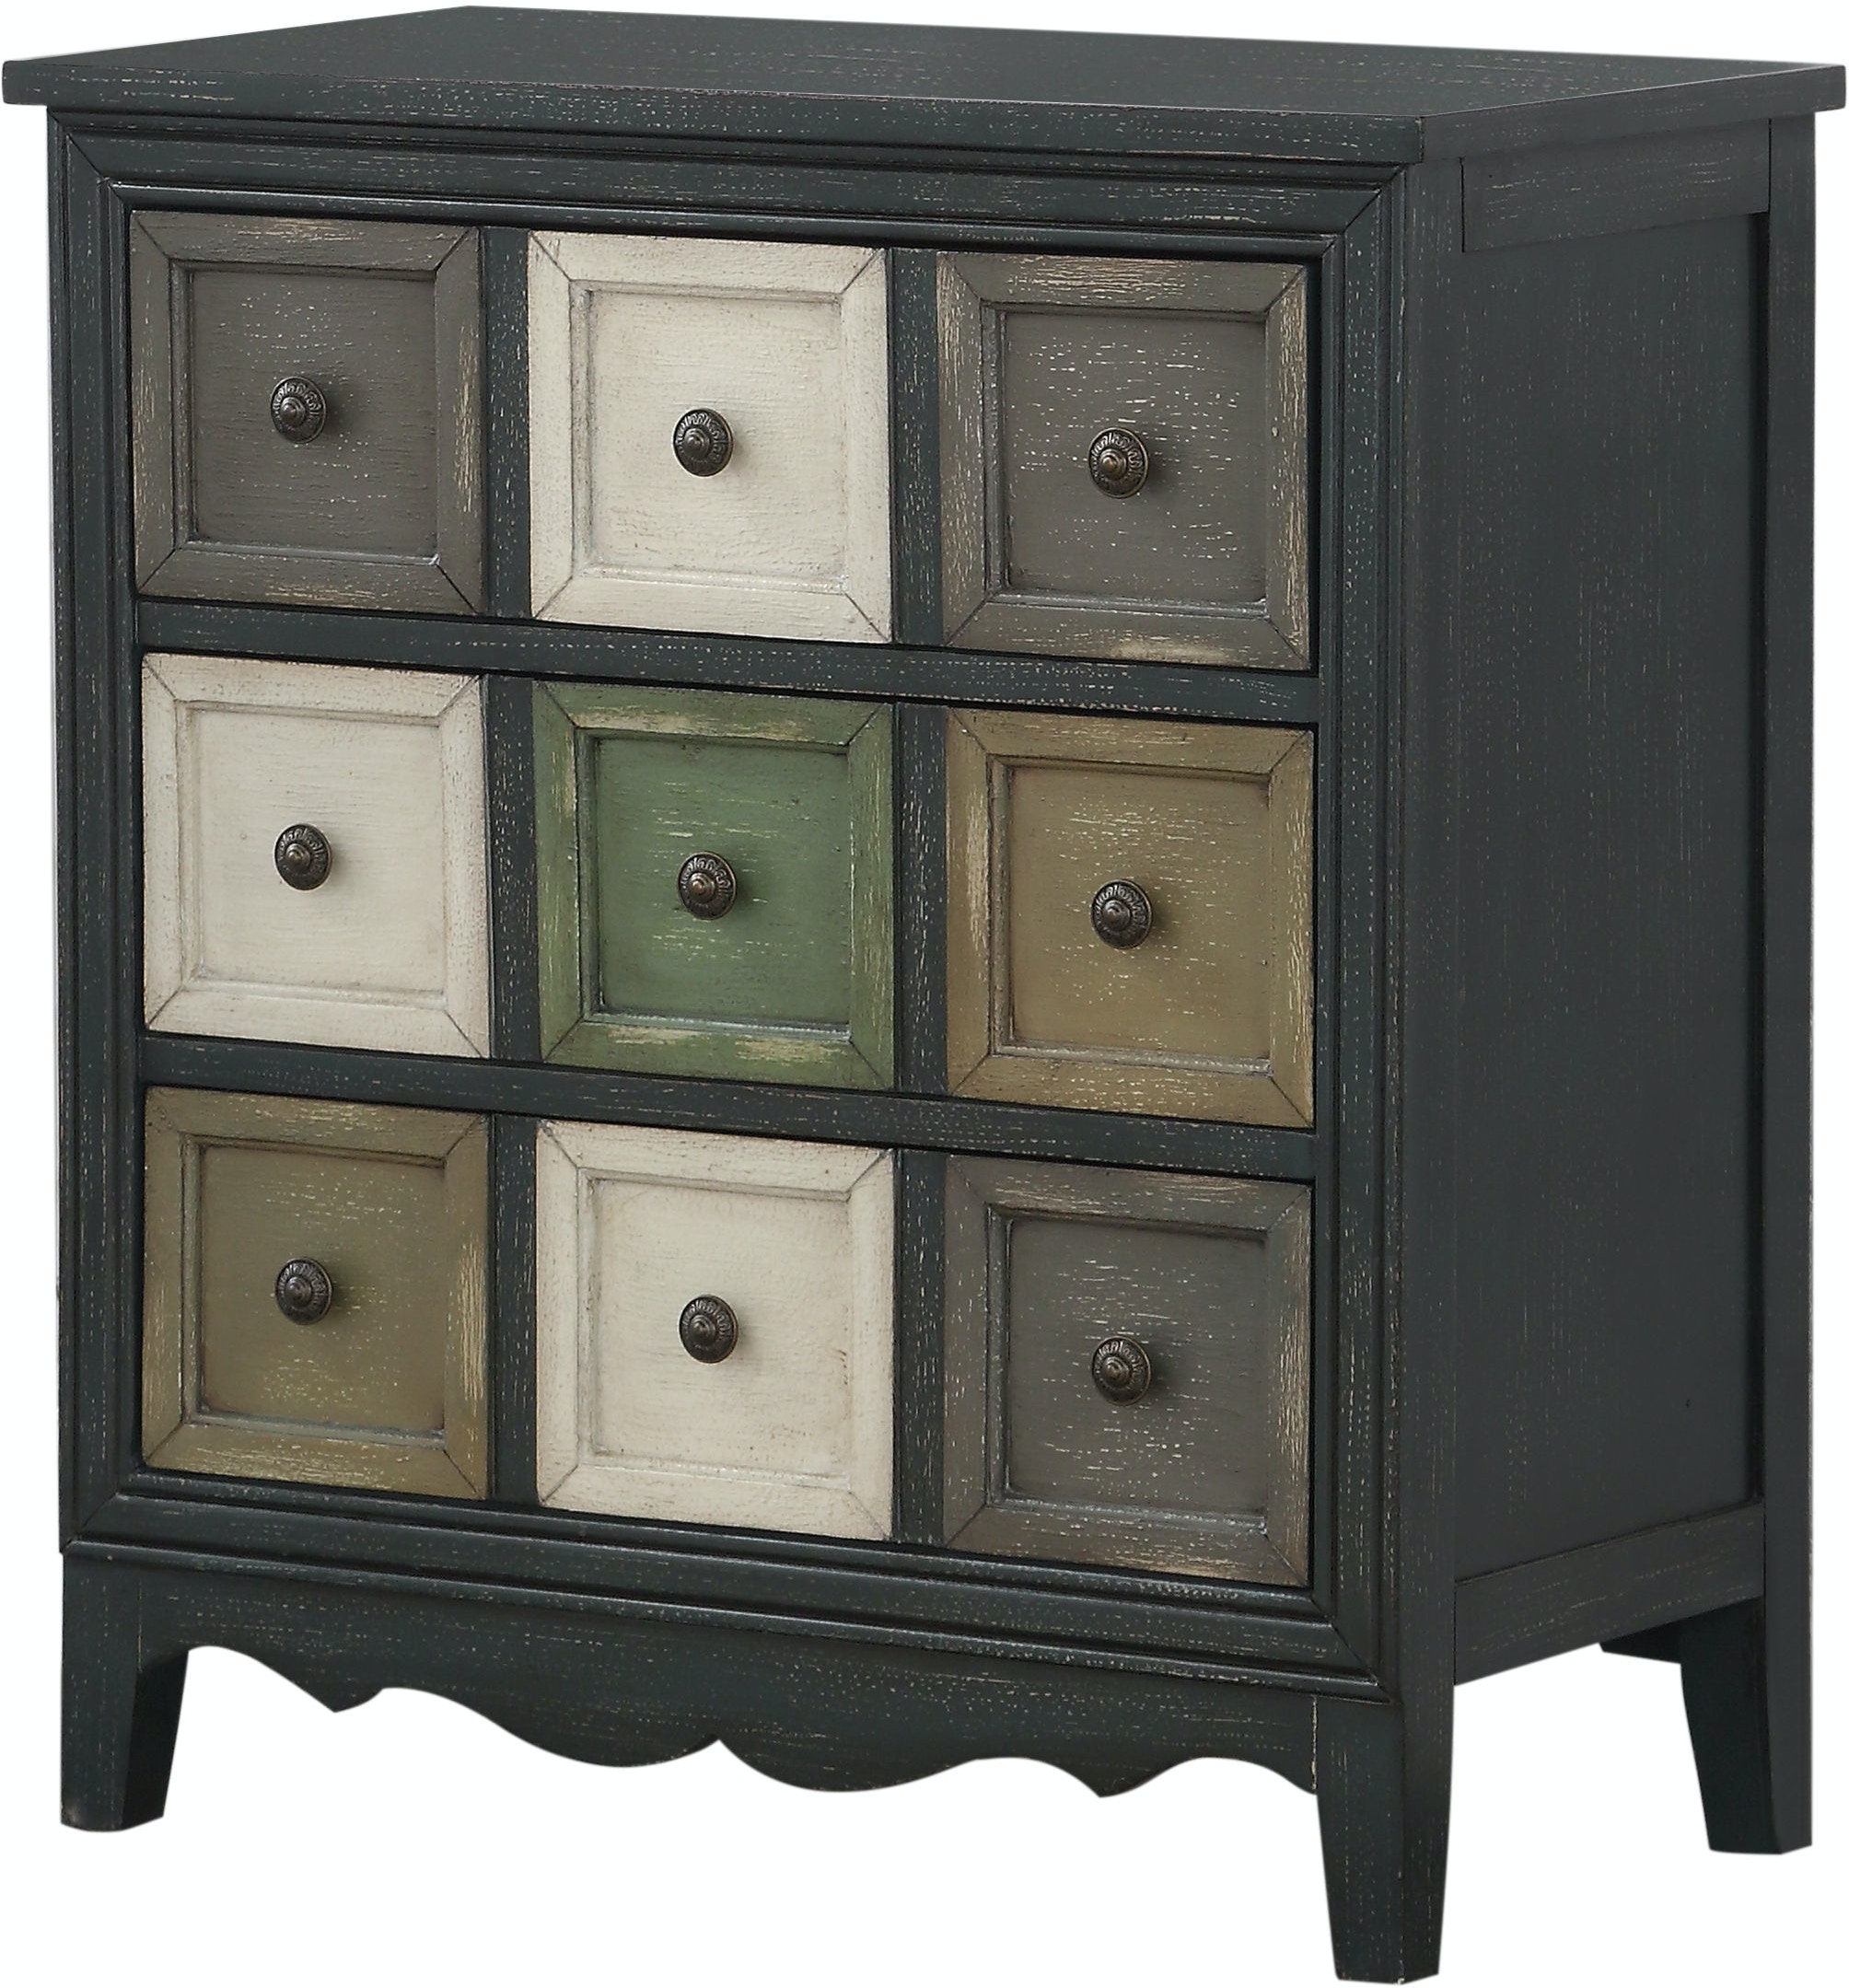 22616 Bakersfield Multi Color 3 Drawer Chest $349.99